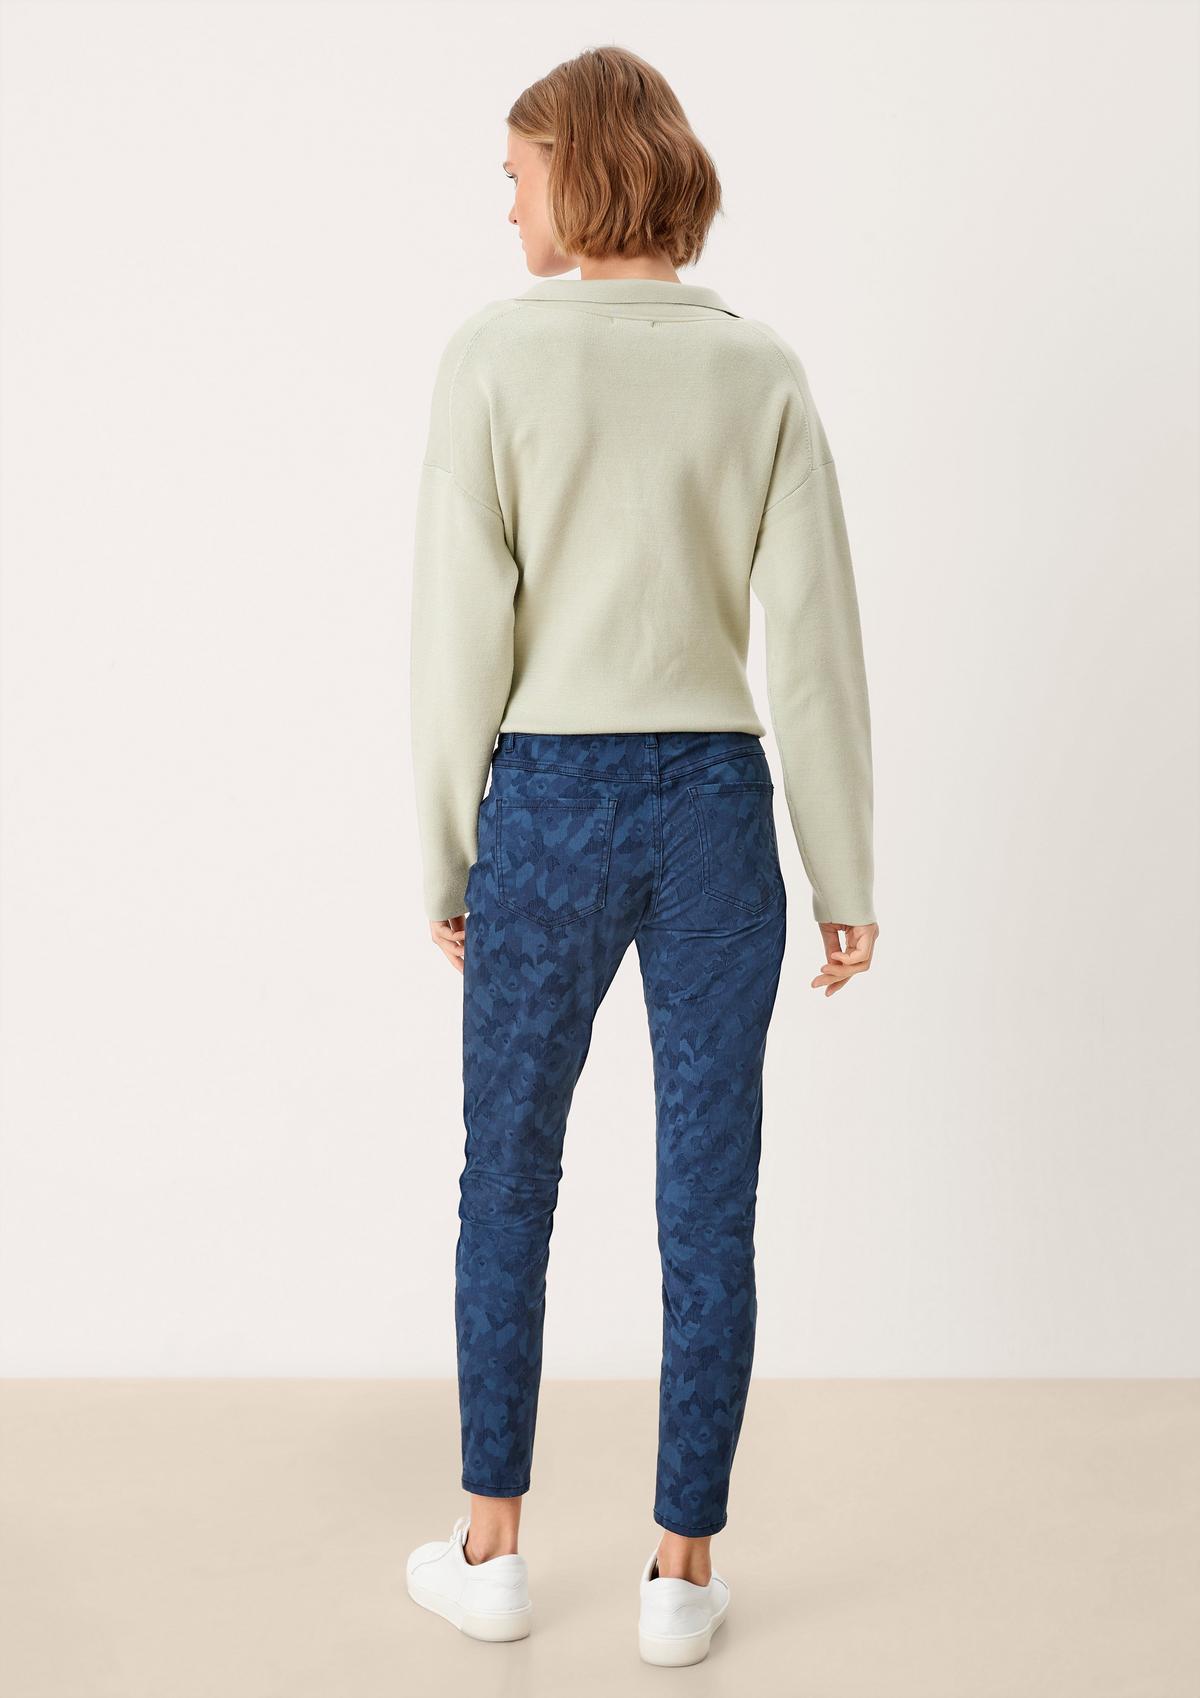 s.Oliver Slim fit: trousers with a print and a yoke waistband